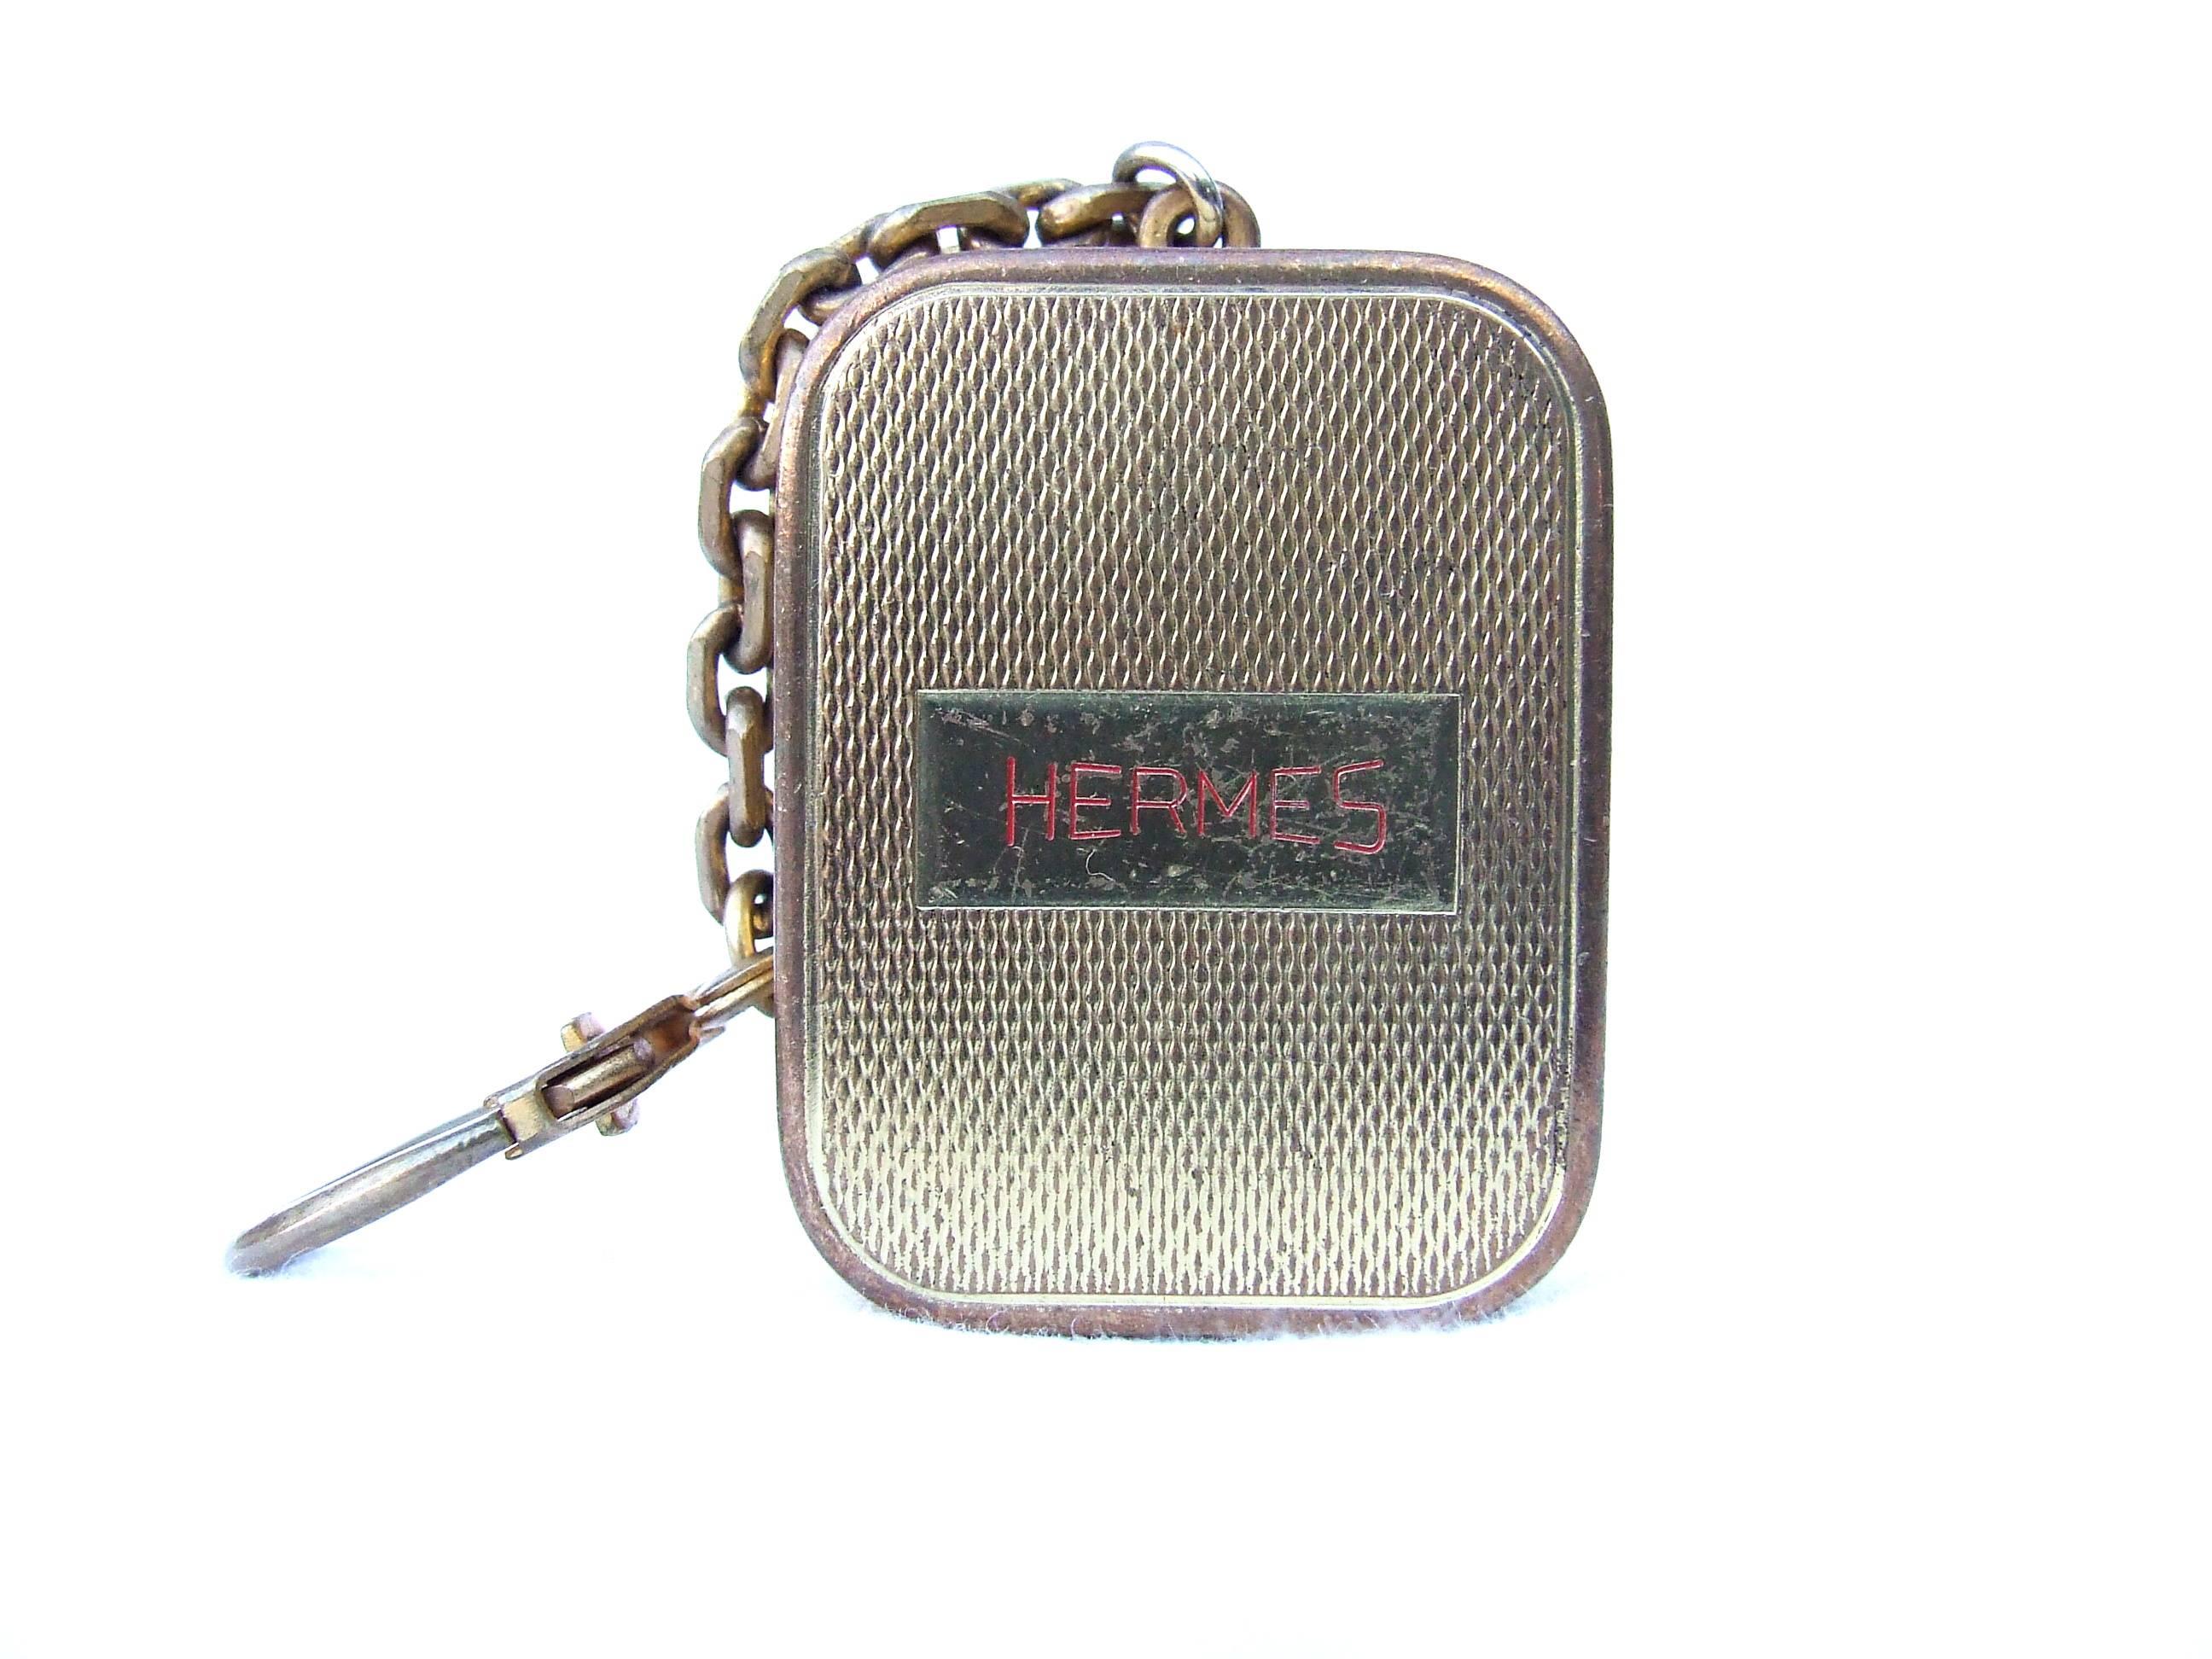 Rare Authentic Hermes Keychain

It is also a music box !

Turn the mecanic key (at the back) clockwise and go up the small button to hear the music 

Made by Reuge, seller of music boxes, located in Sainte Croix, Swiss

"HERMES" in red